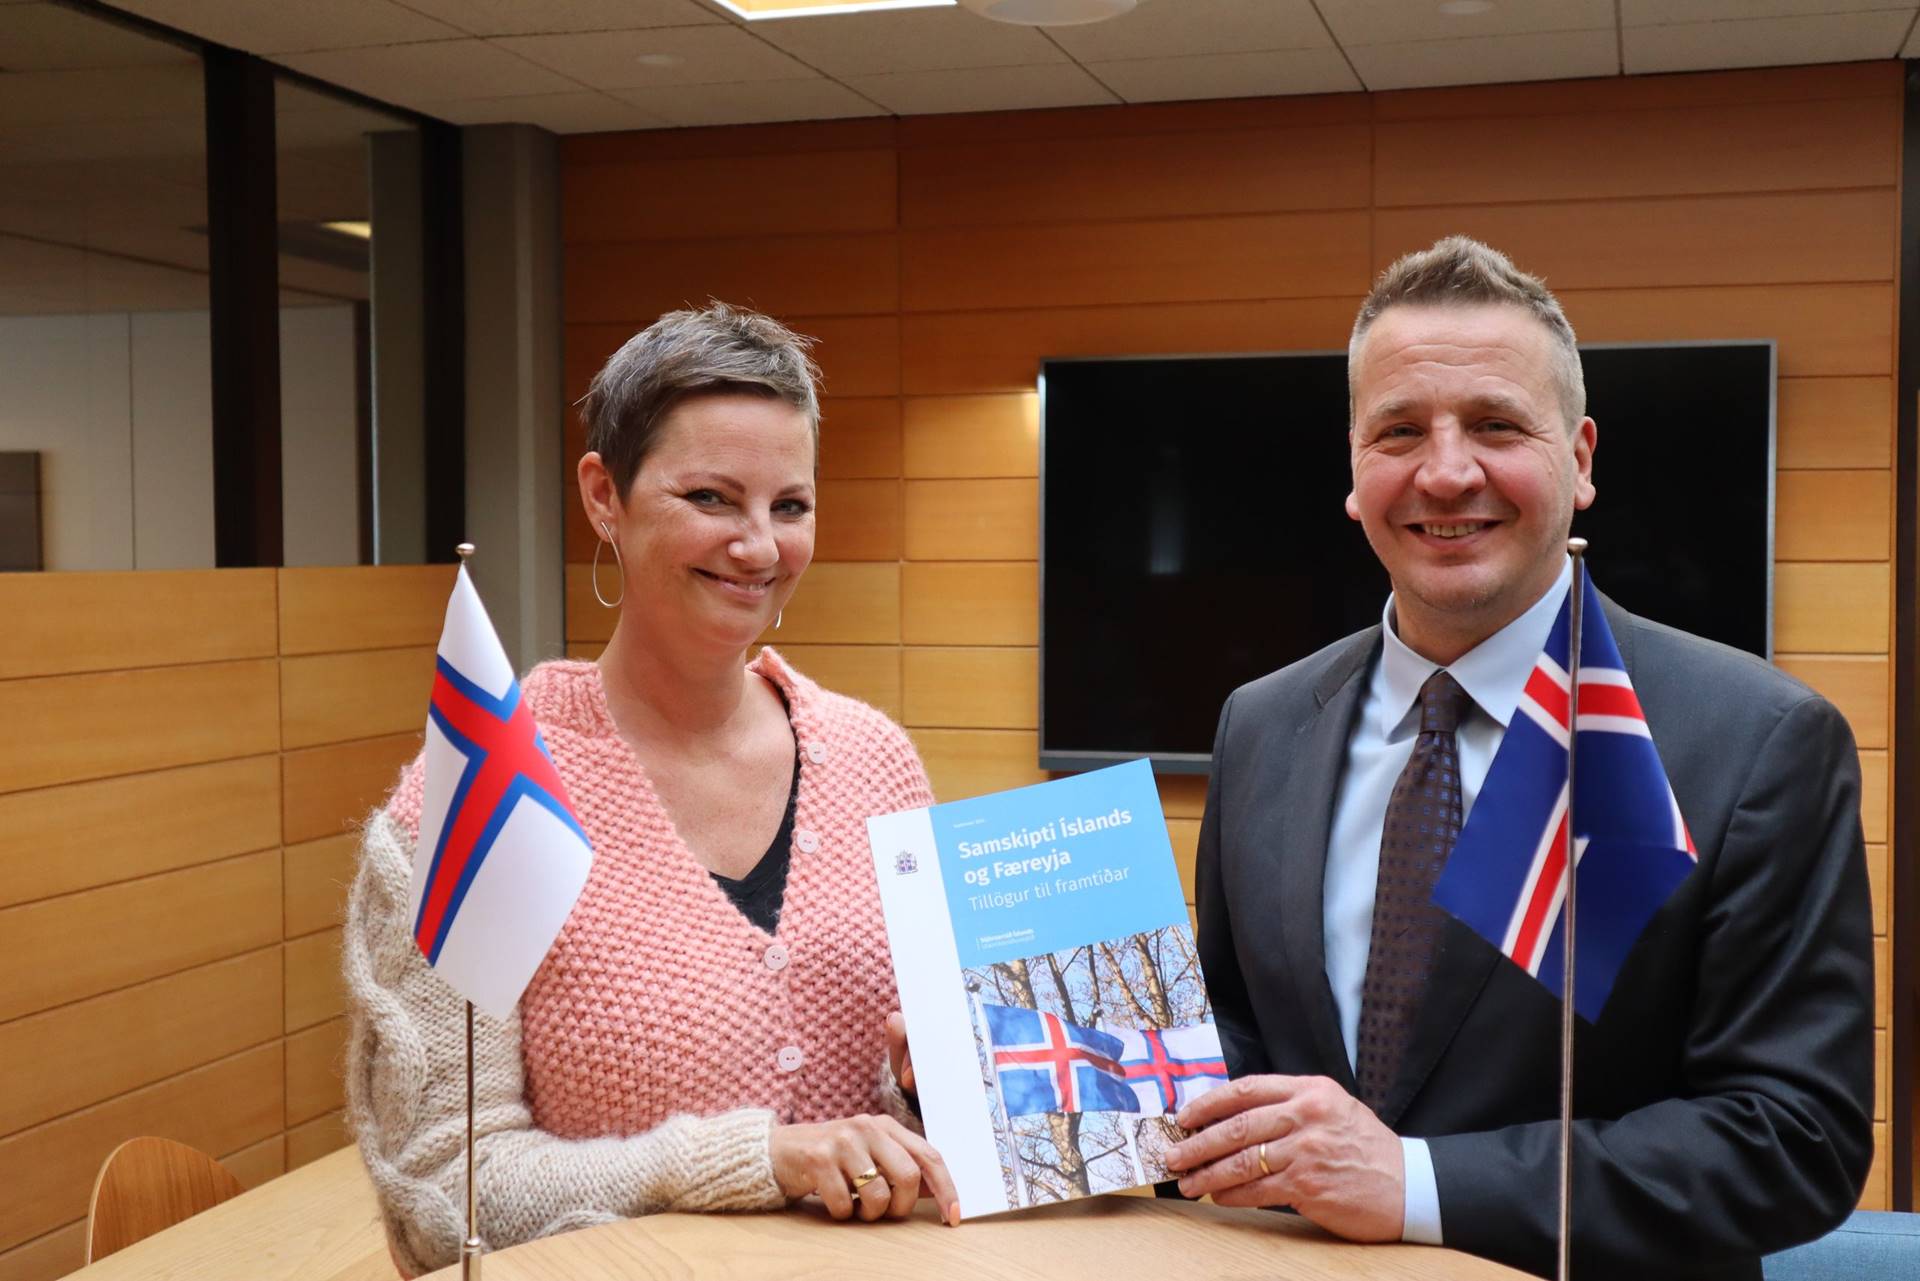 Gudlaugur Thór Thórdarson, Minister for Foreign Affairs of Iceland, and Halla Nolsøe Poulsen, Head of Representation of the Faroe Islands in Iceland, discussing the report. - mynd